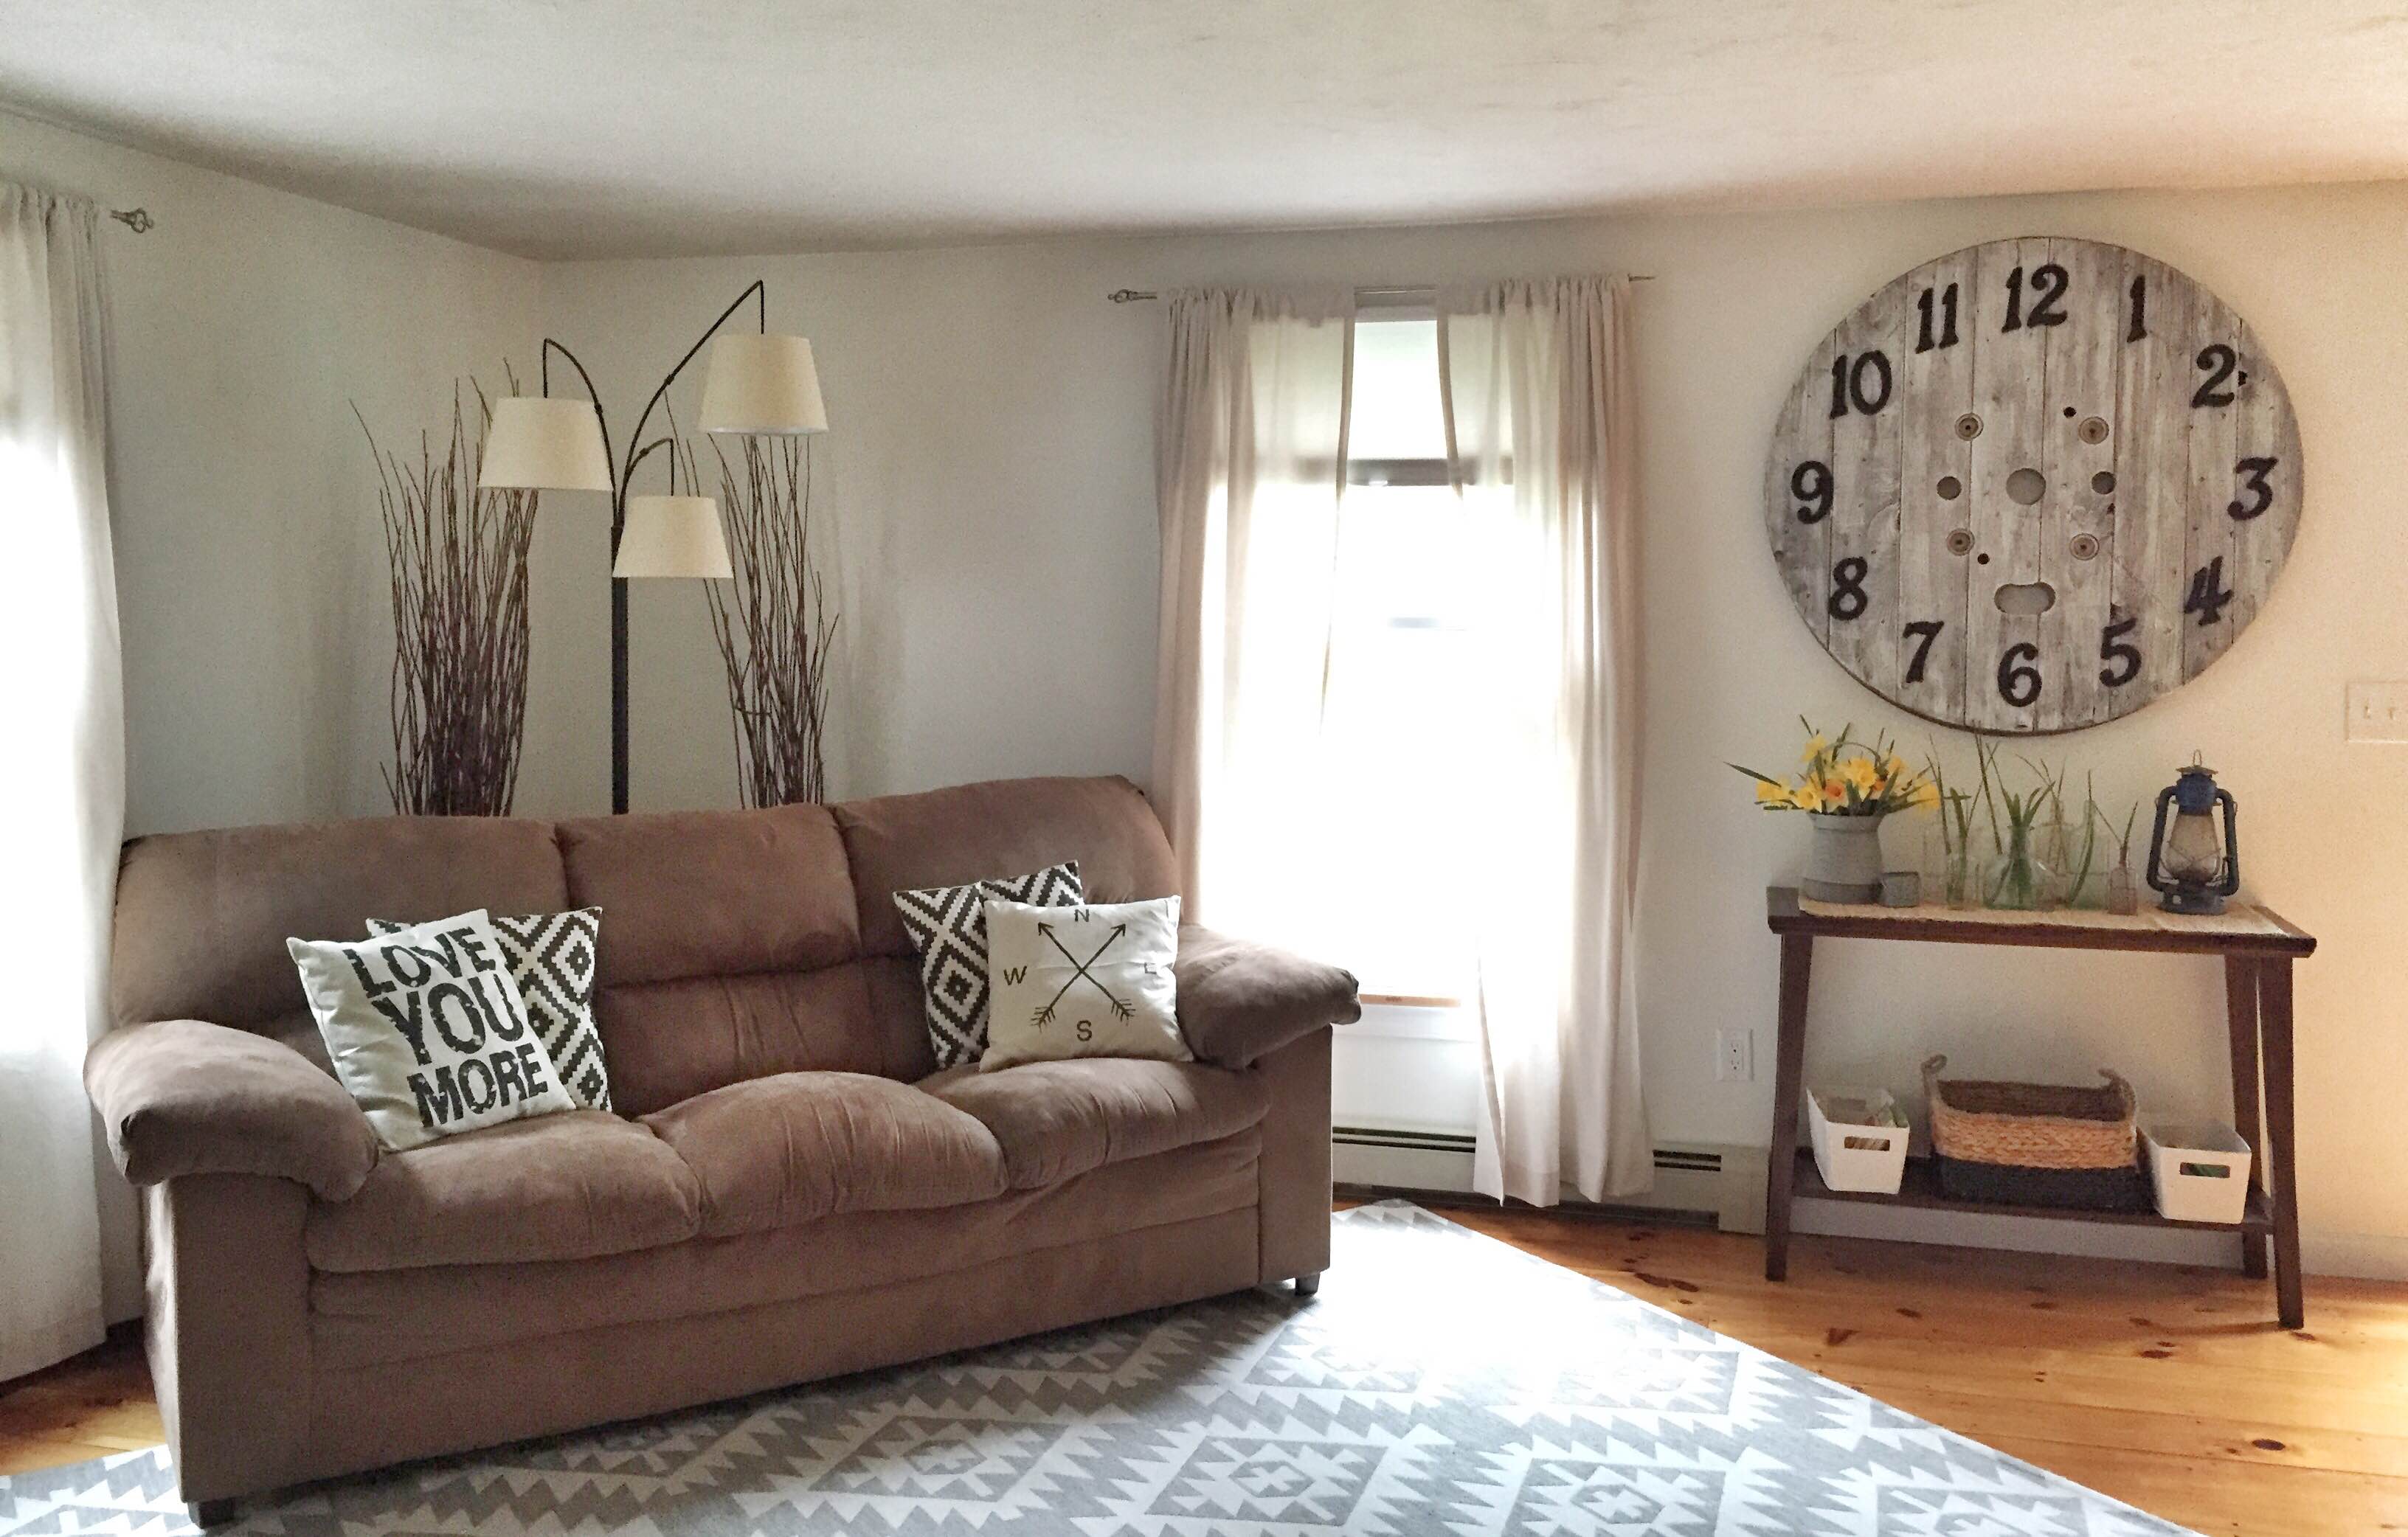 Family Room Farmhouse Facelift! | Check out this living room / family room makeover - a touch of charm and a whole lot of character and fixer upper design in this cape style family room space. GinaKirk.com @ginaekirk